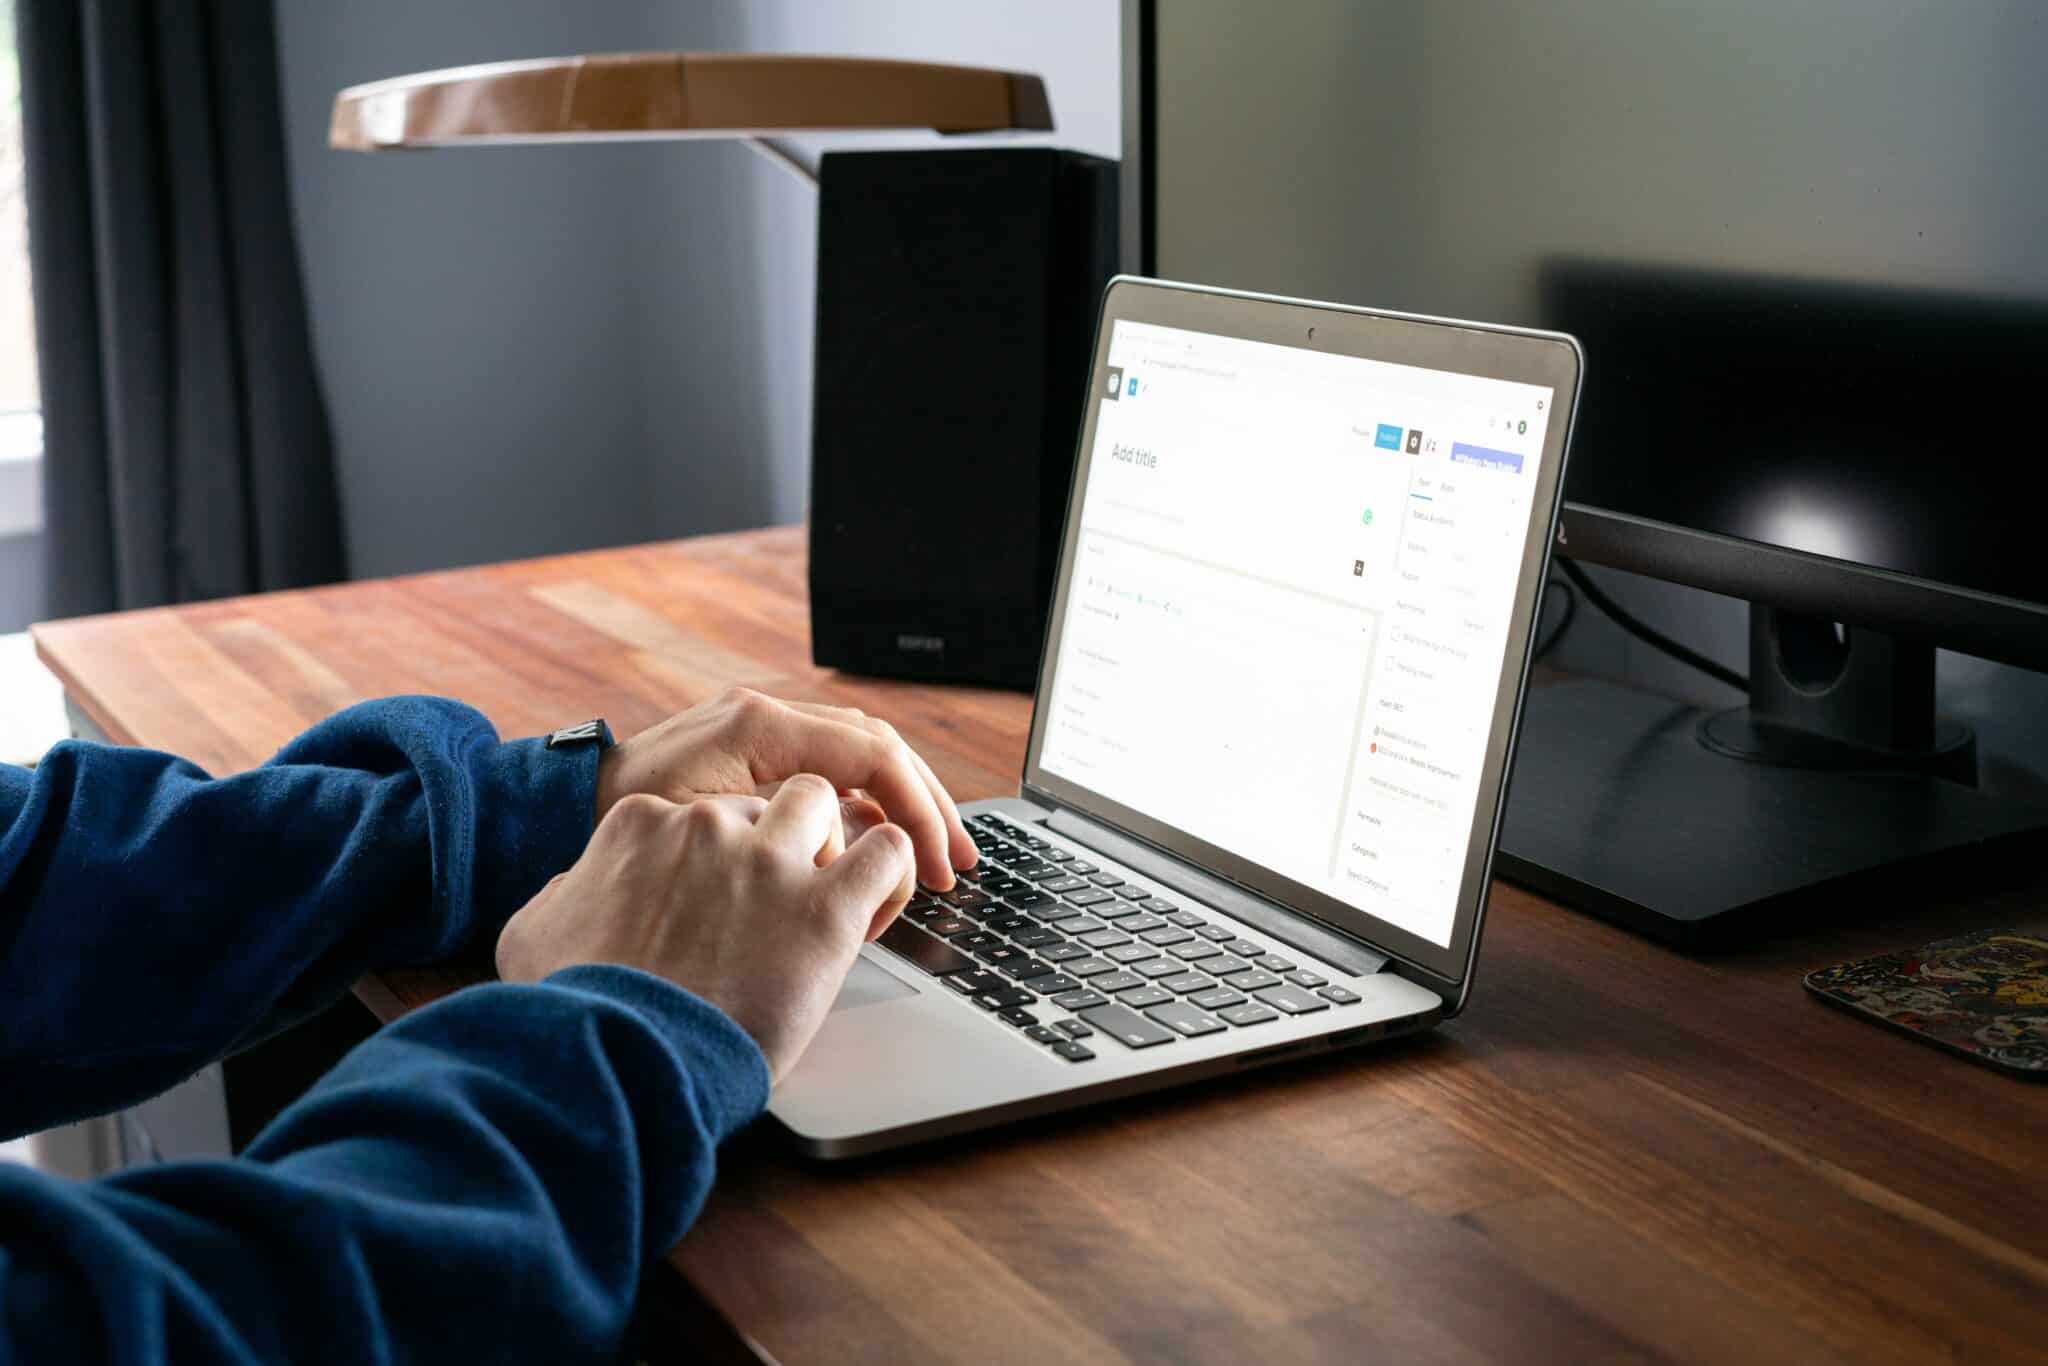 Zoomed in shot of person wearing a dark blue sweater, hands typing on a MacBook laptop at a wooden desk